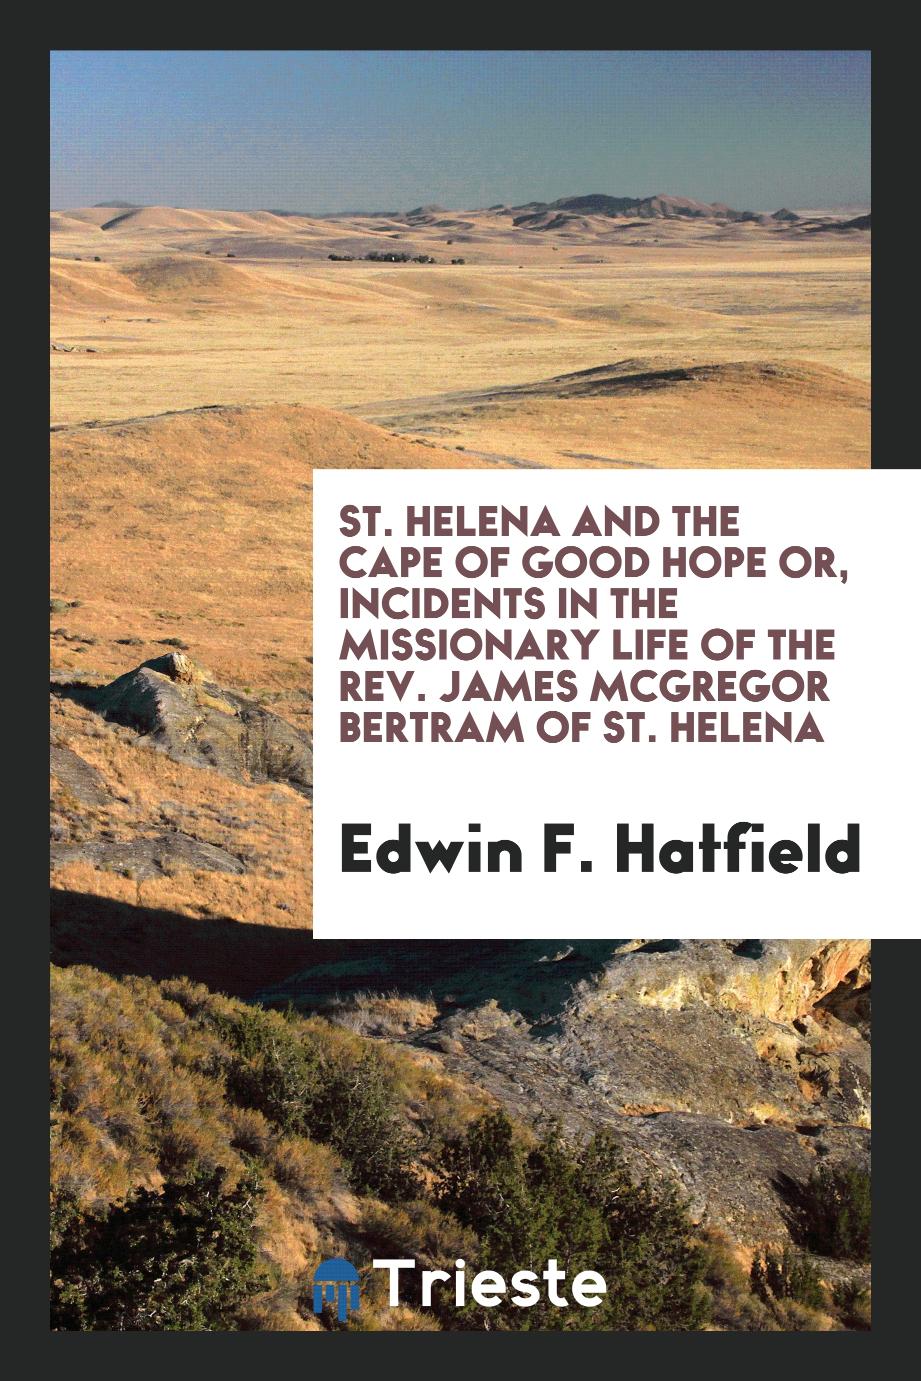 St. Helena and the Cape of Good Hope or, Incidents in the missionary life of the Rev. James McGregor Bertram of St. Helena